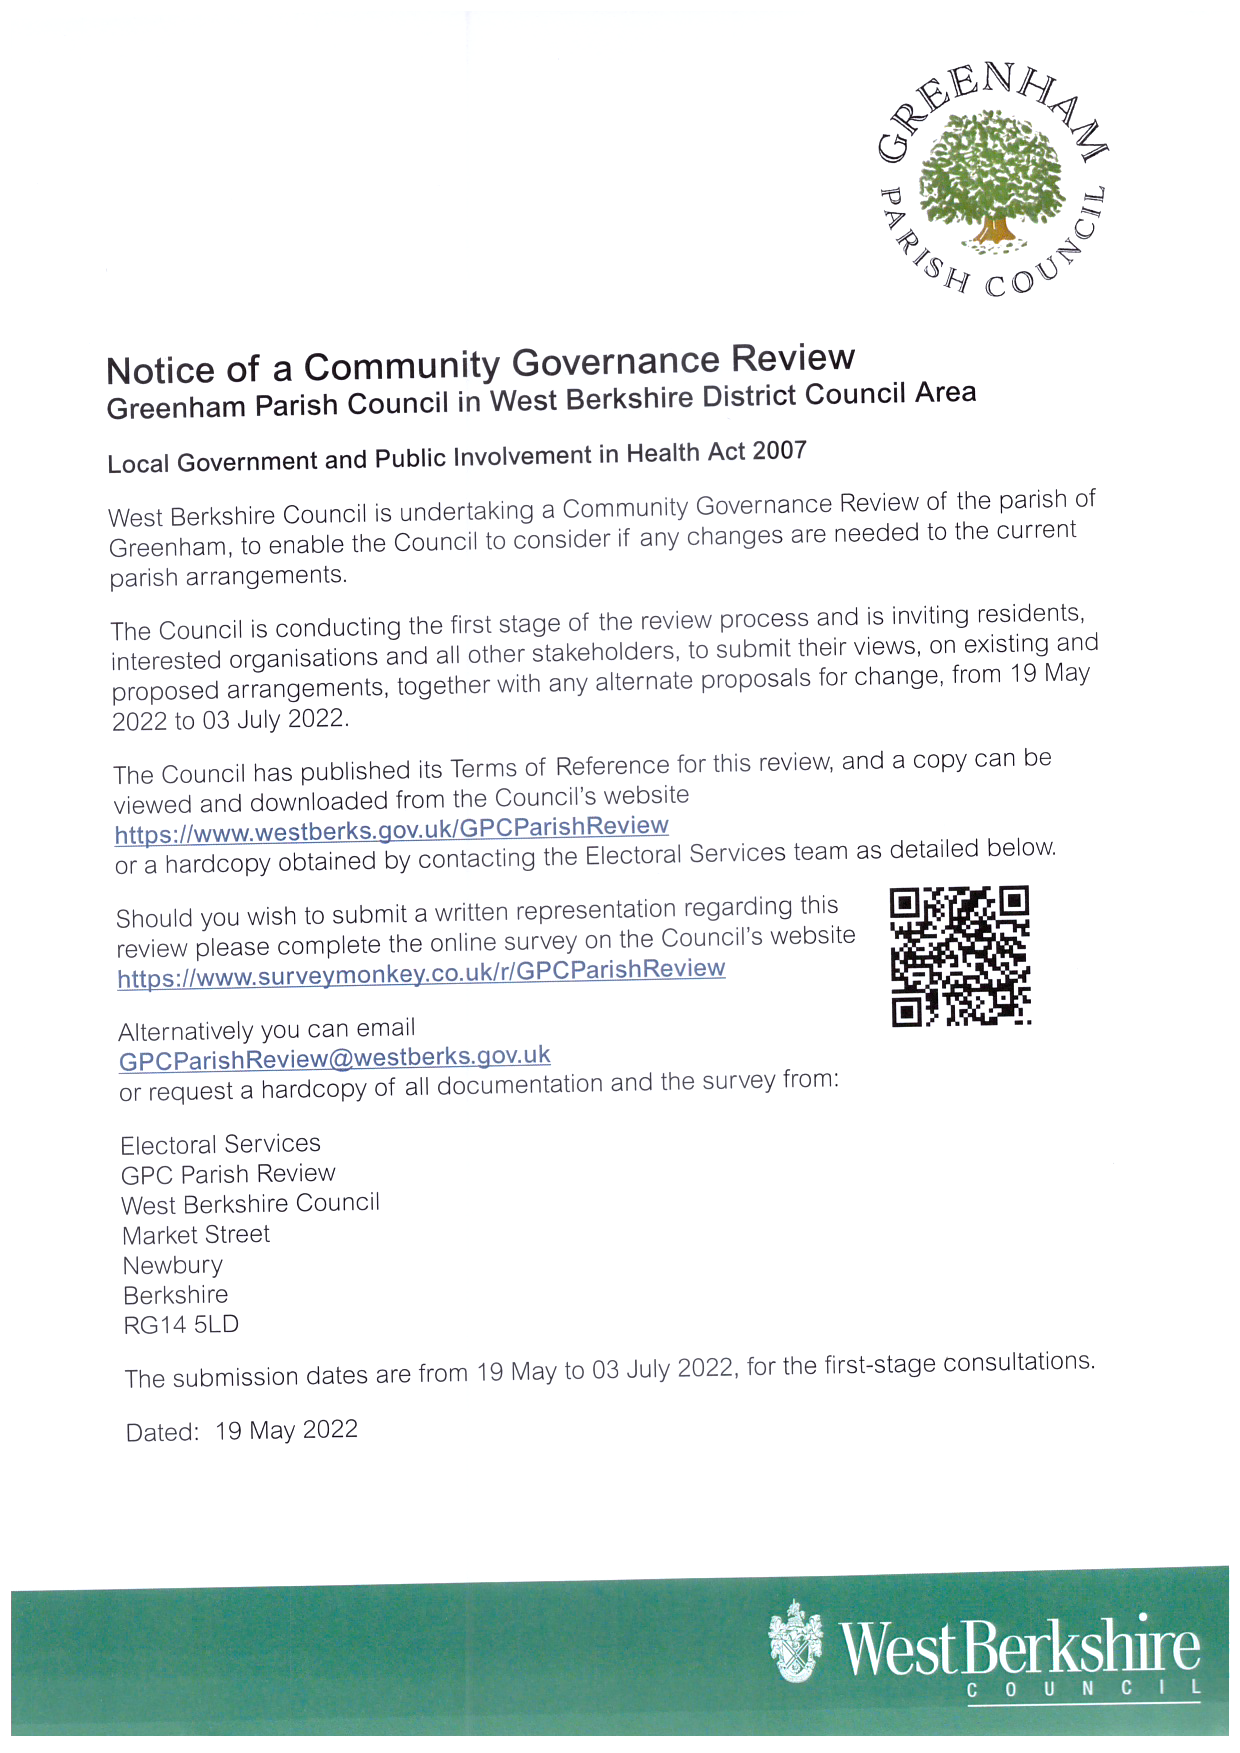 Wests Berkshire Community Governance review